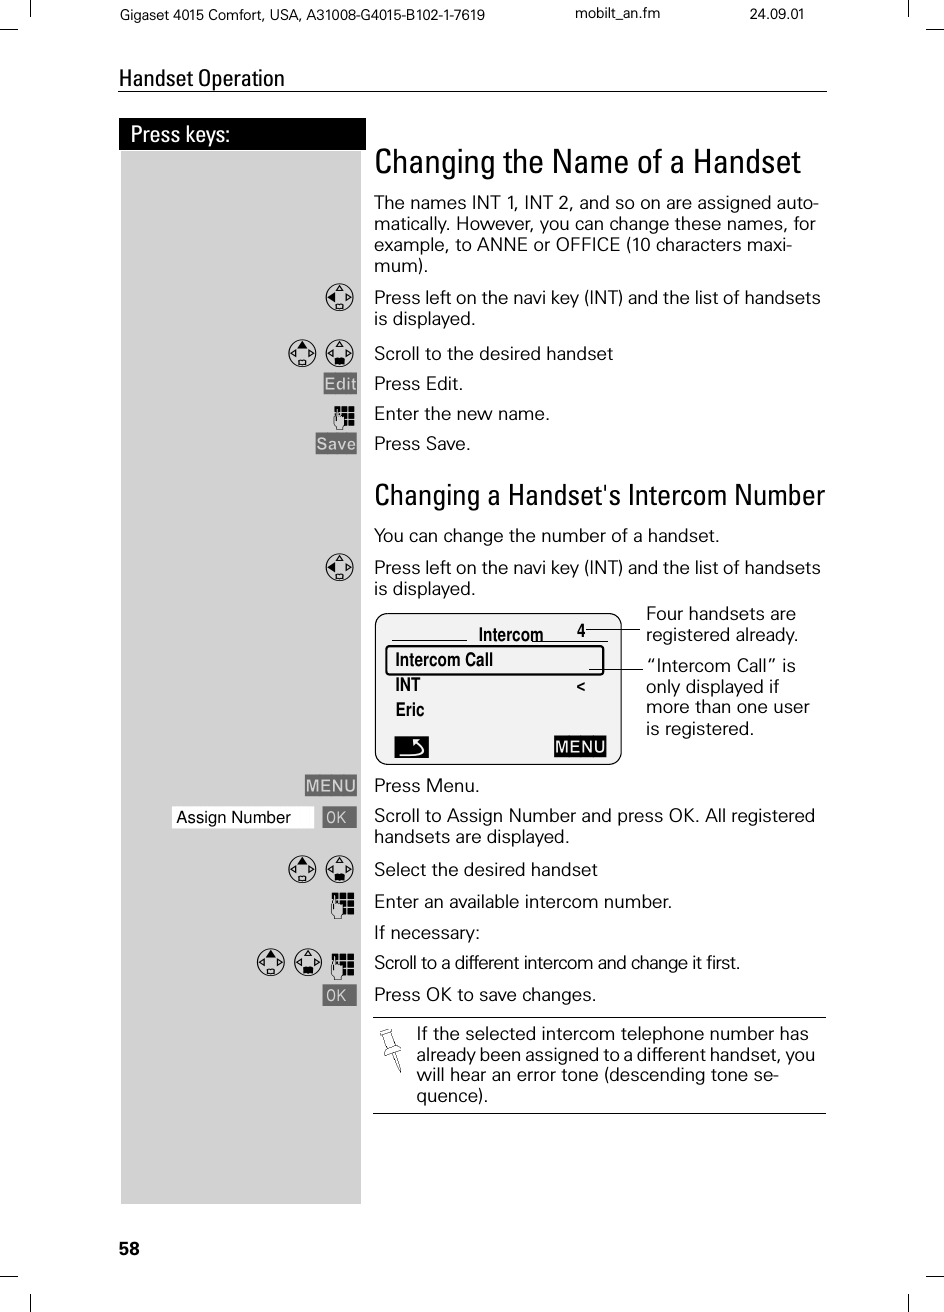 58Press keys:Handset OperationGigaset 4015 Comfort, USA, A31008-G4015-B102-1-7619 mobilt_an.fm 24.09.01Changing the Name of a HandsetThe names INT 1, INT 2, and so on are assigned auto-matically. However, you can change these names, for example, to ANNE or OFFICE (10 characters maxi-mum).Press left on the navi key (INT) and the list of handsets is displayed. Scroll to the desired handset (GLW Press Edit.)Enter the new name. 6DYH Press Save.Changing a Handset&apos;s Intercom NumberYou can change the number of a handset.Press left on the navi key (INT) and the list of handsets is displayed. 0(18 Press Menu.]]]]]]]]]]]]]]]]]]]]]]]]]]]]]]]]Assign Number Scroll to Assign Number and press OK. All registered handsets are displayed. Select the desired handset)Enter an available intercom number.If necessary:Q Scroll to a different intercom and change it first.Press OK to save changes.Intercom 4Intercom Call INT &lt;EricFour handsets are registered already.“Intercom Call” is only displayed if more than one user is registered. Q0(18If the selected intercom telephone number has already been assigned to a different handset, you will hear an error tone (descending tone se-quence).